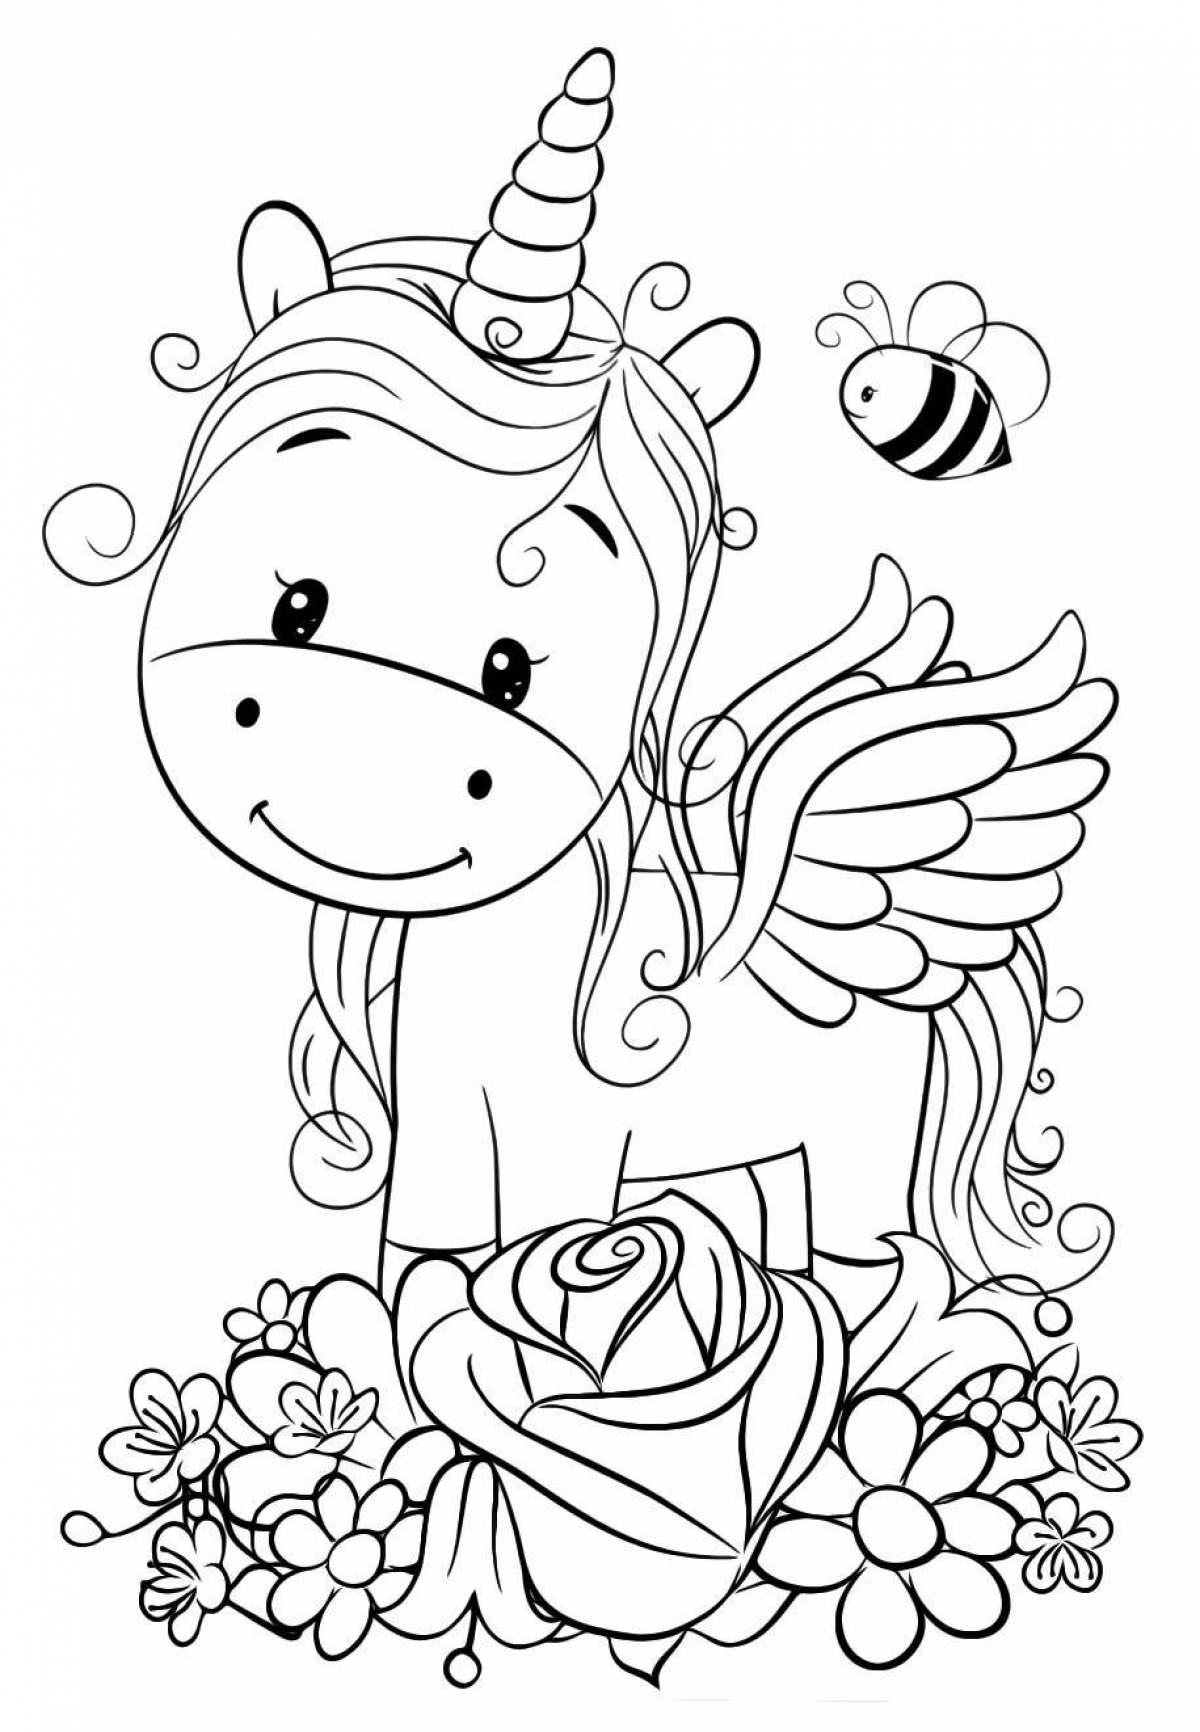 Luminous unicorn coloring book for 5 year old girls